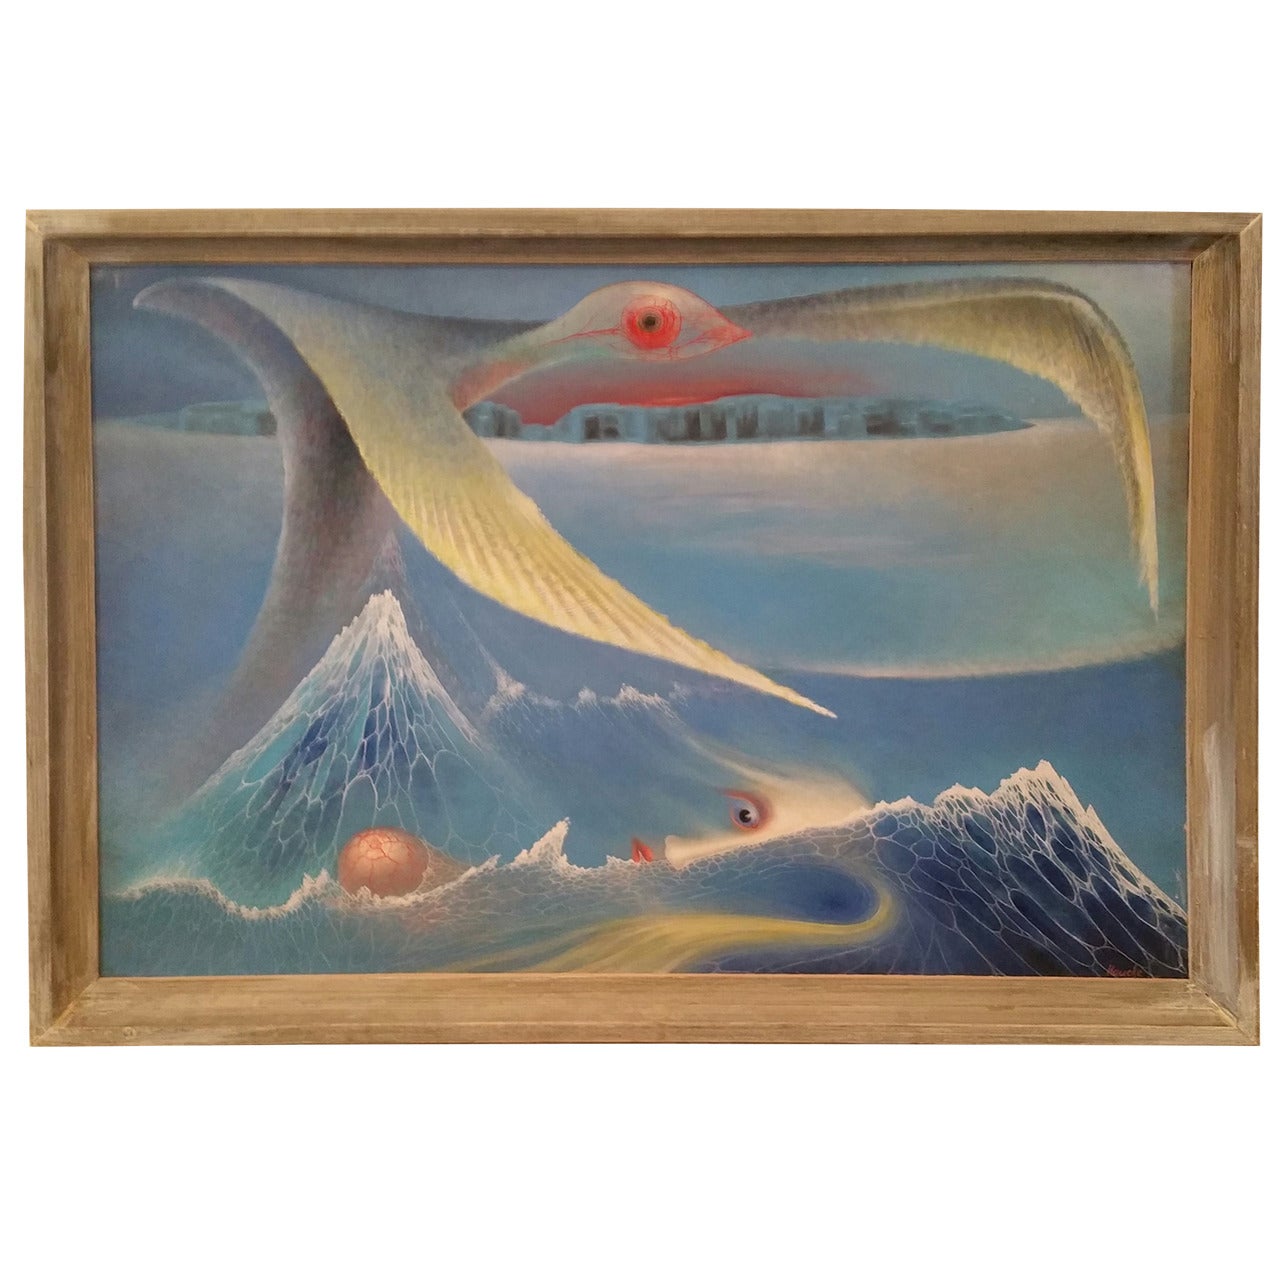 Surrealist Painting, Oil on Canvas by Frederick Haucke, 1908-1965